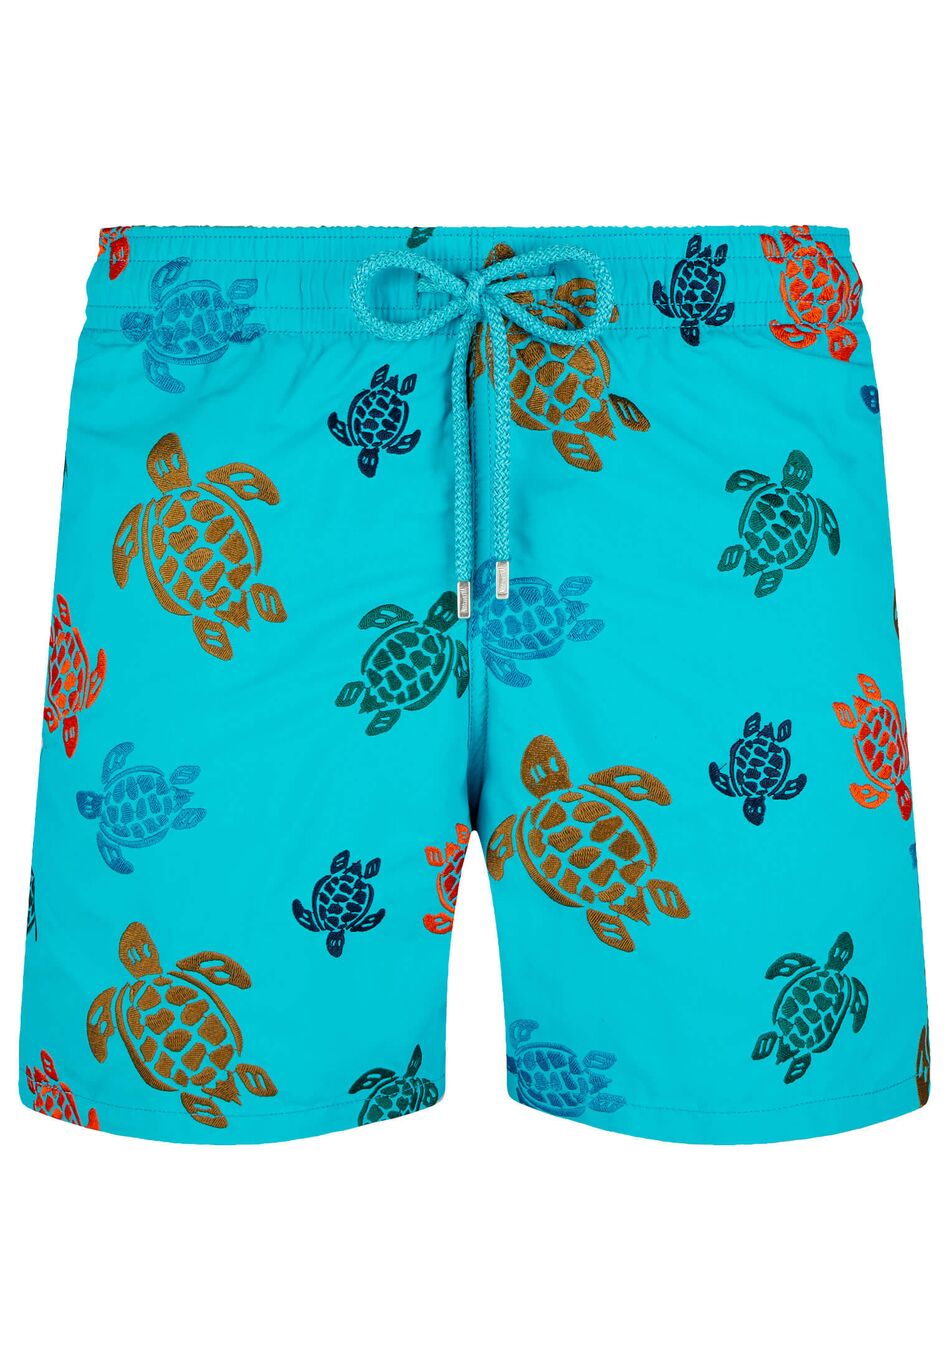 Embroidered Swim Shorts Ronde Des Tortues – Limited Edition